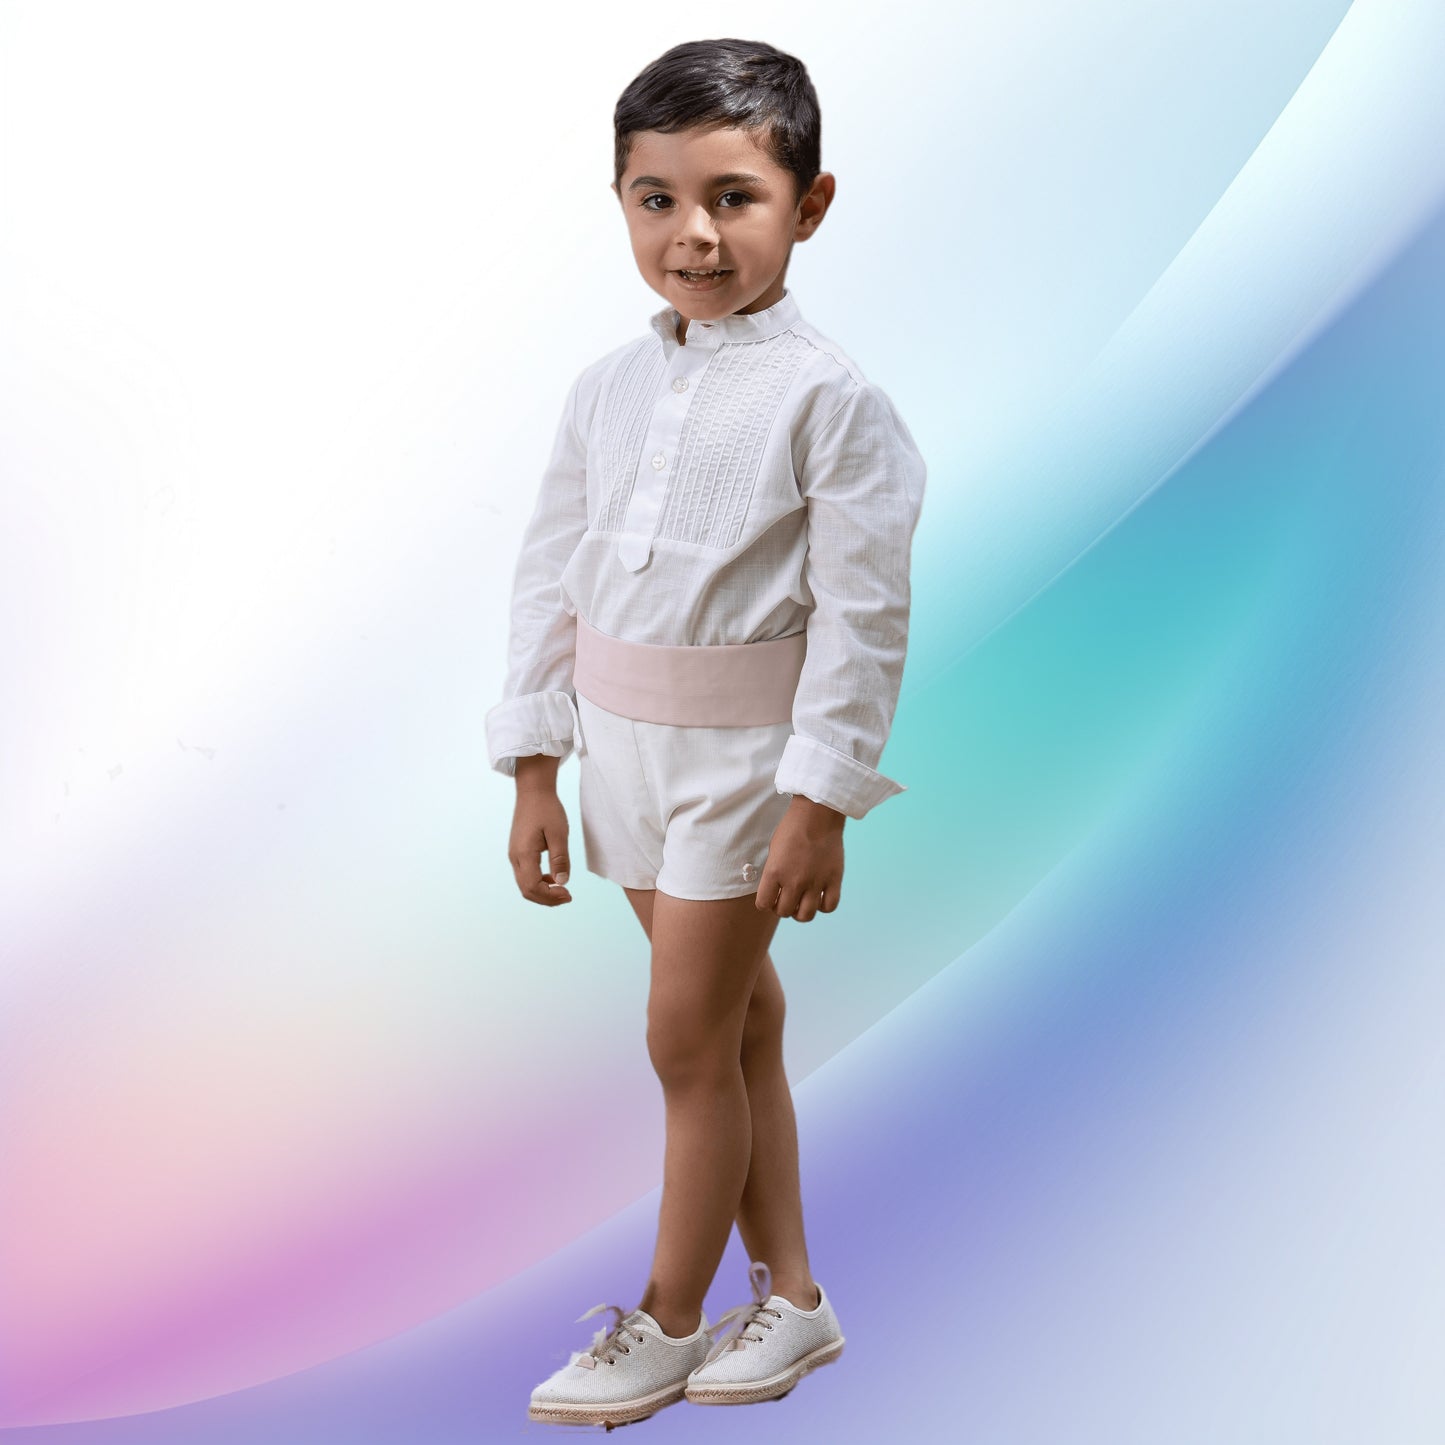 Image of a dapper off-white and pale pink boy's ceremony outfit designed for babies and toddlers. Perfect for events such as weddings, christenings, baptisms, or church gatherings, the handcrafted European-style attire features an off-white shirt and cotton shorts, complemented by a striking pale pink sash, making your little ring bearer look both charming and sophisticated.